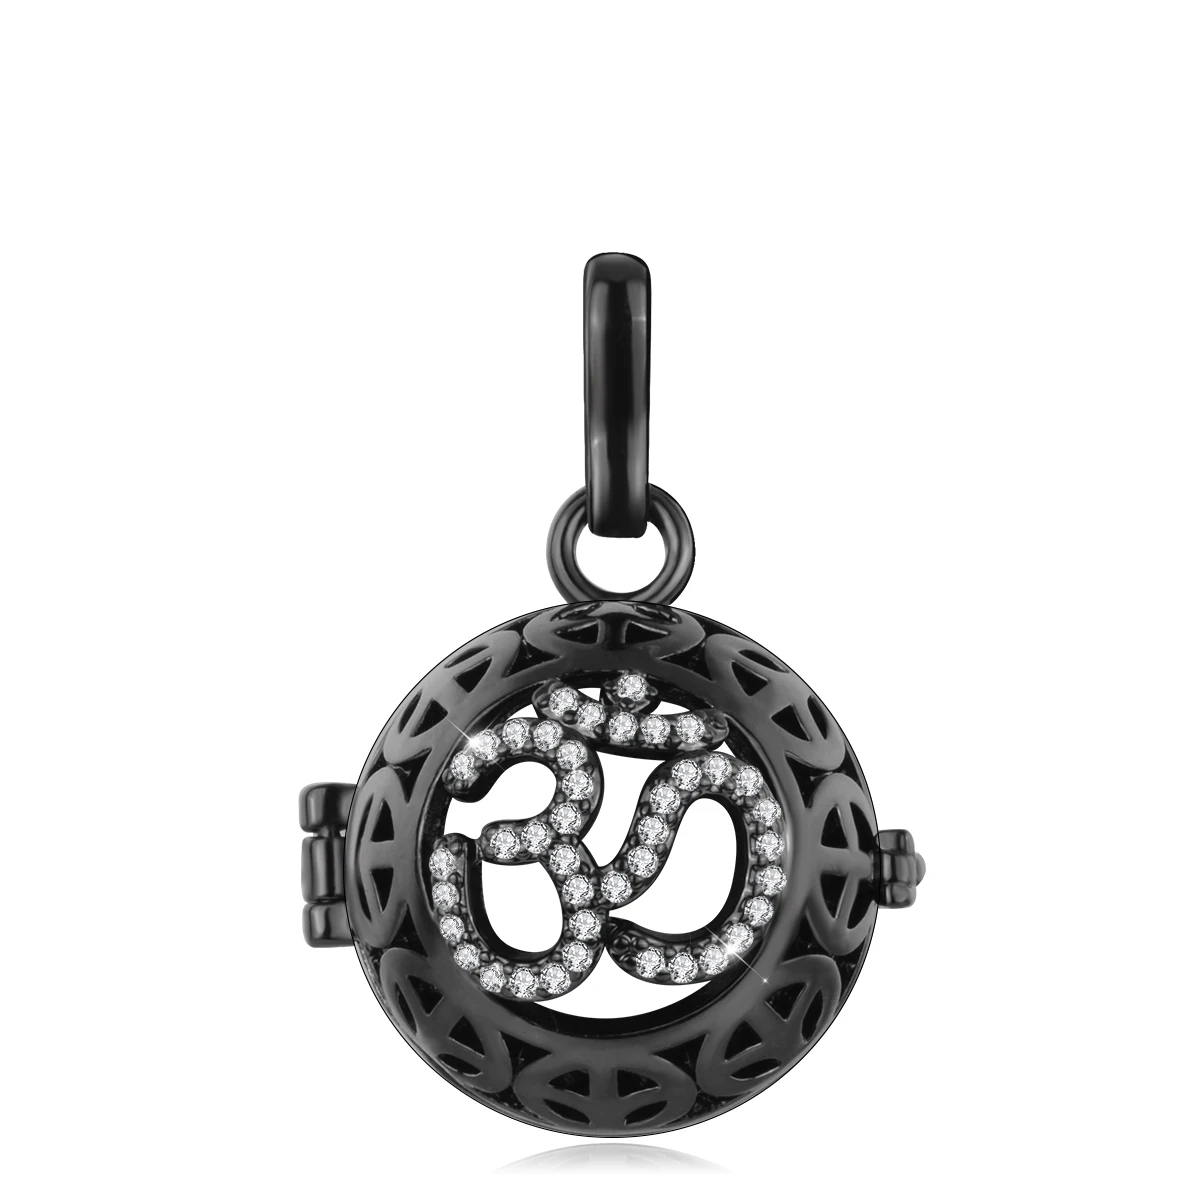 Lotus Cage Locket Pendant STERLING SILVER 925 Secret Compartment Harmony  Ball